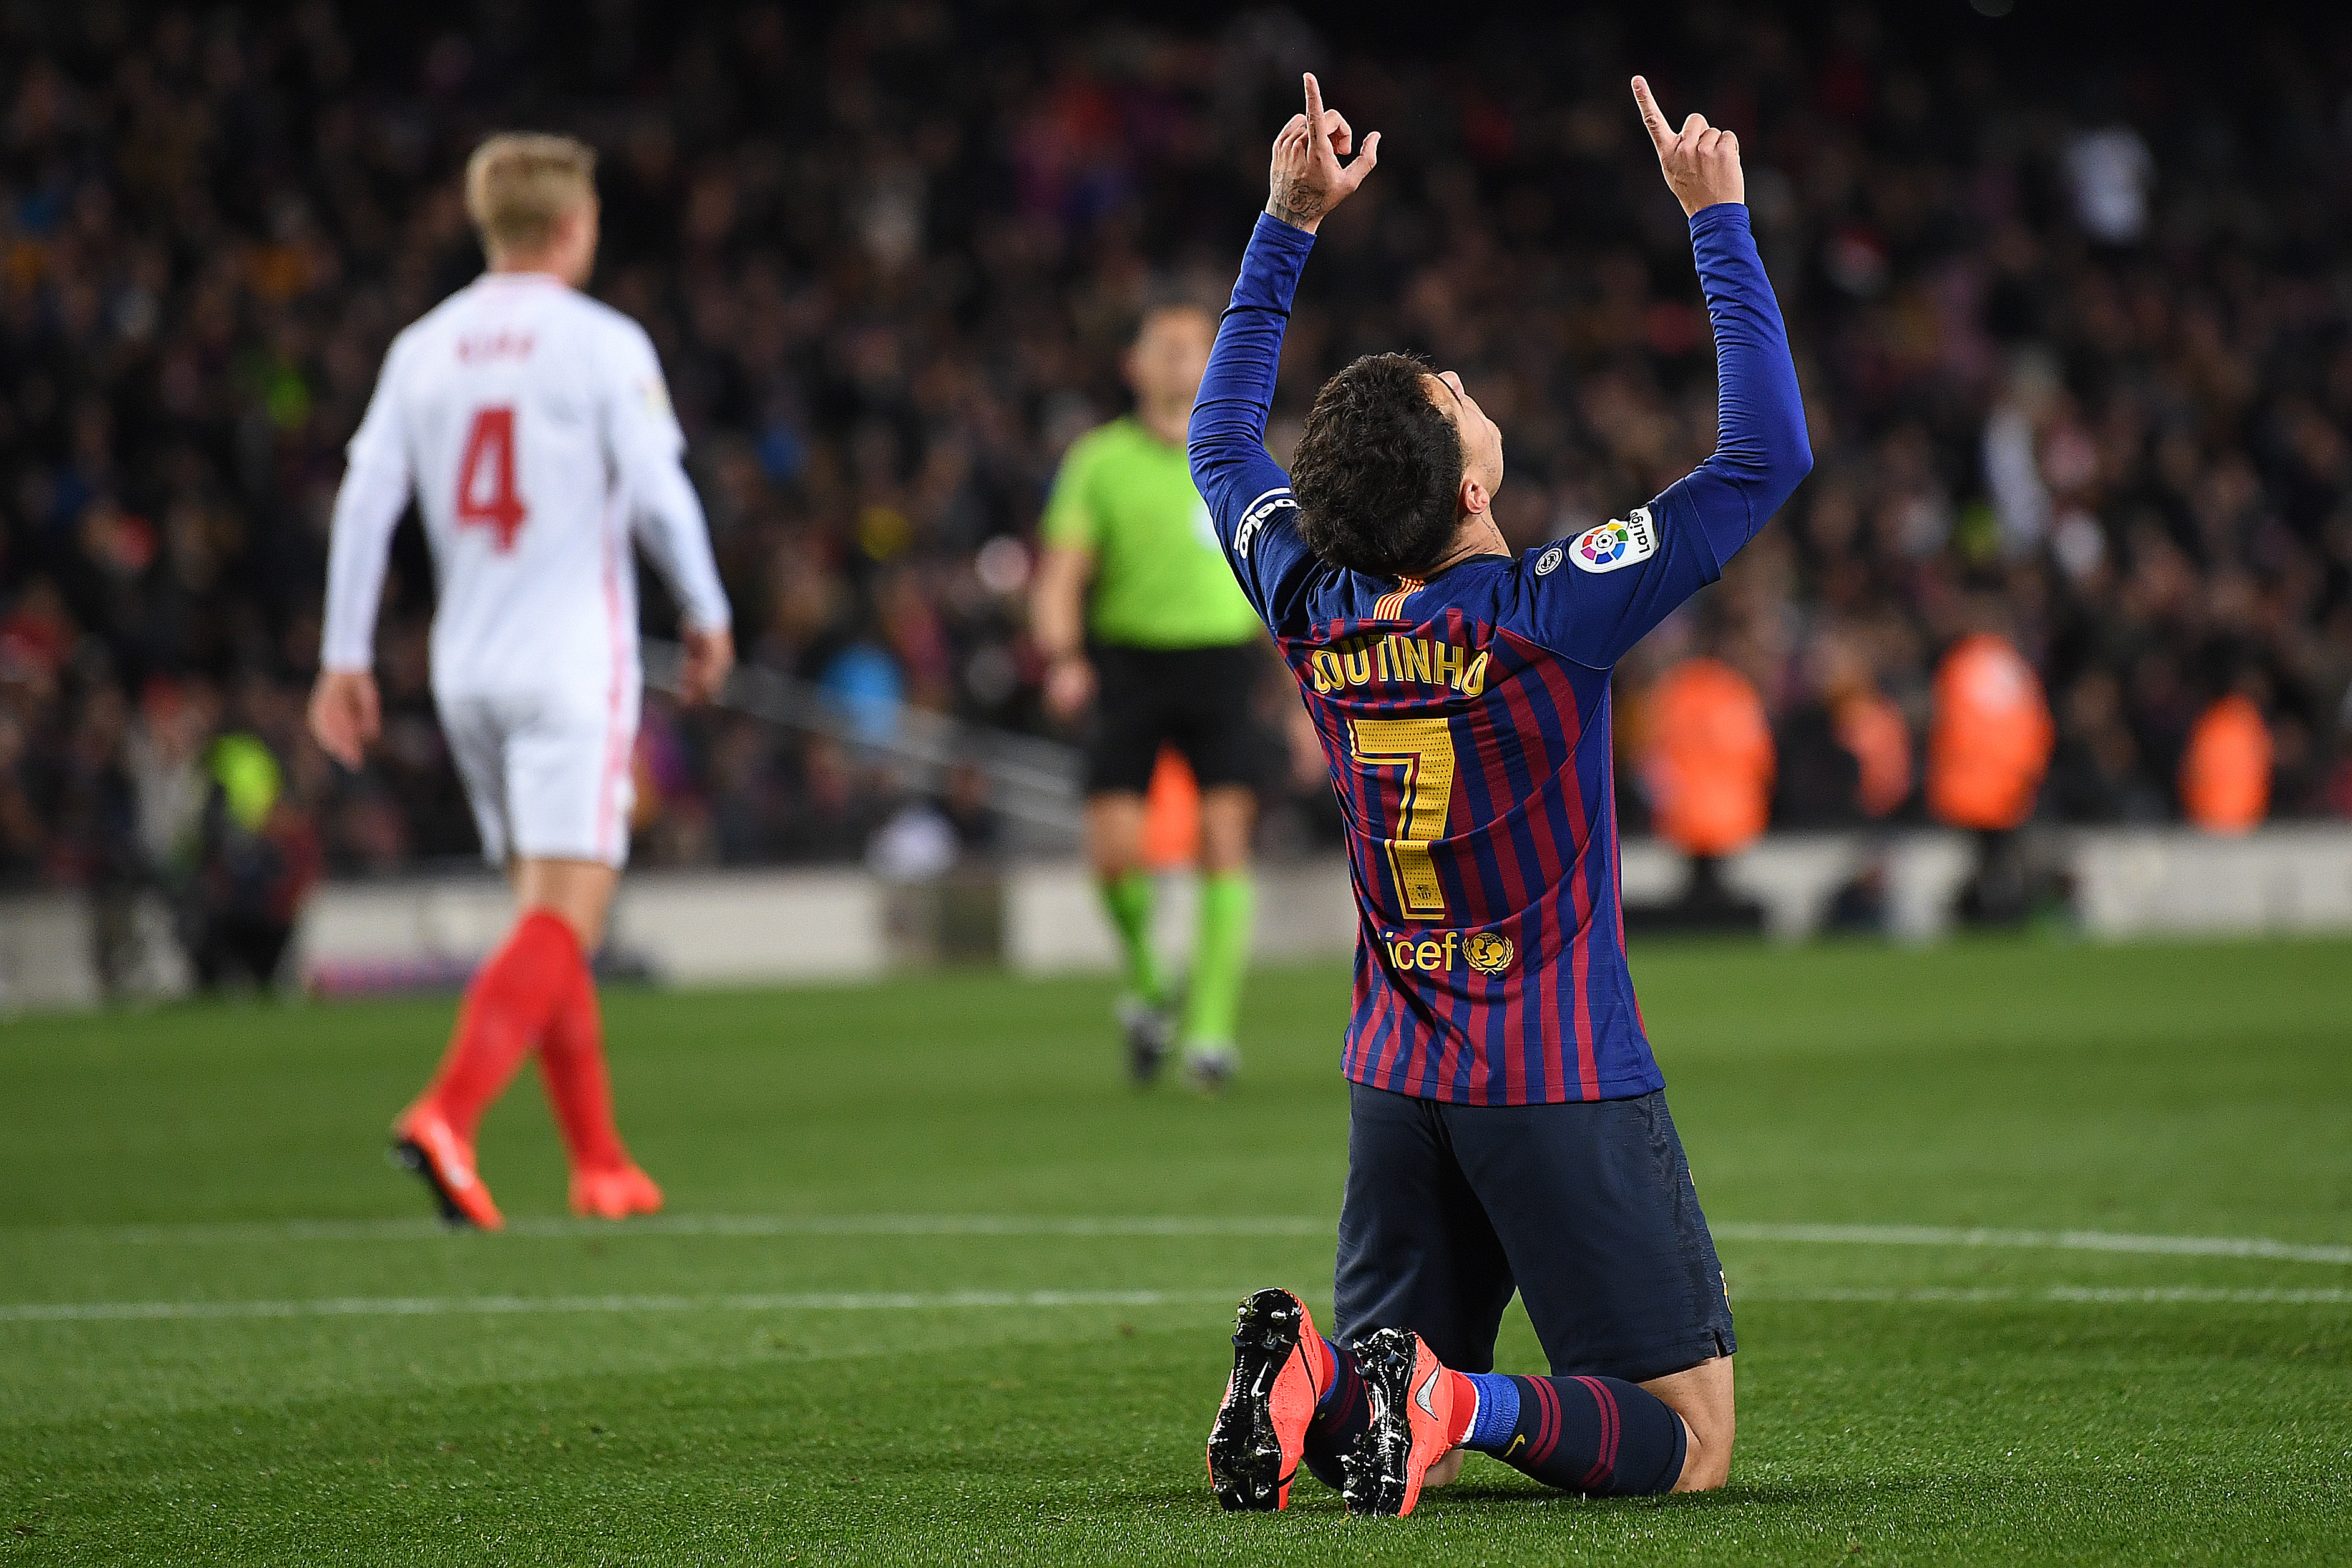 The Barcelona dream seems to be over for Coutinho. (Photo by David Ramos/Getty Images)